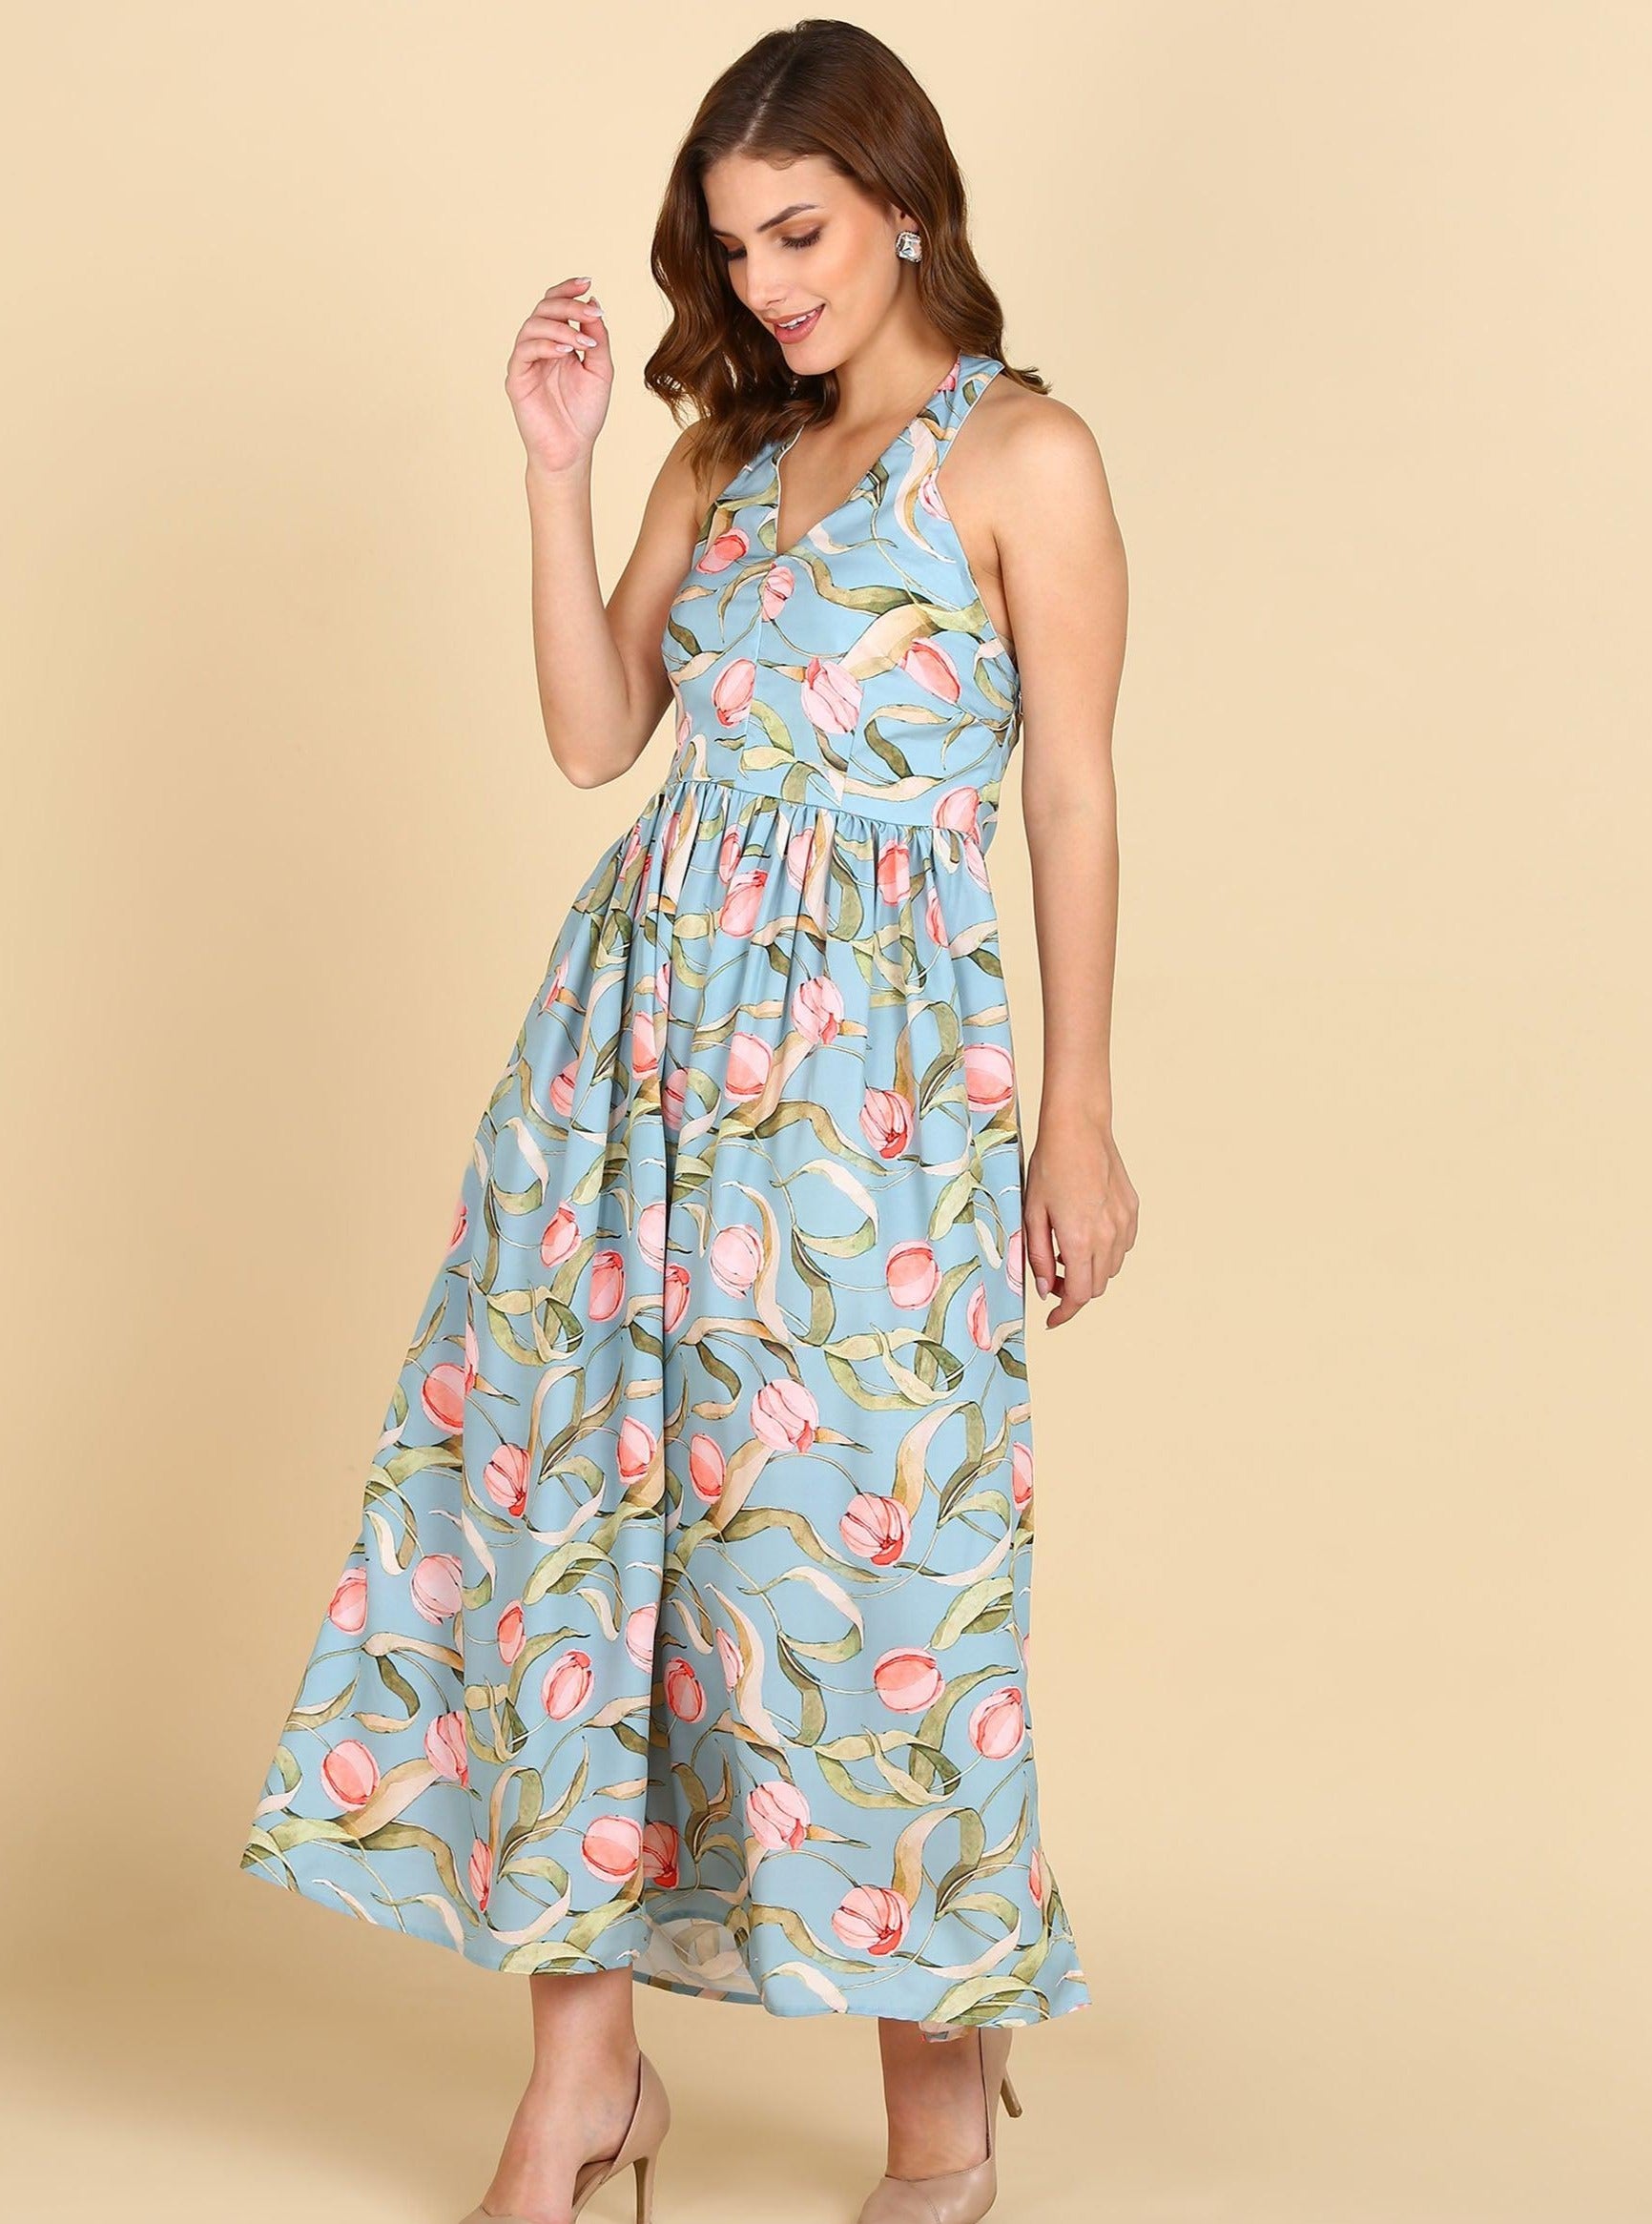 Floral Printed Sea Green Halter Neck Dress - Znxclothing